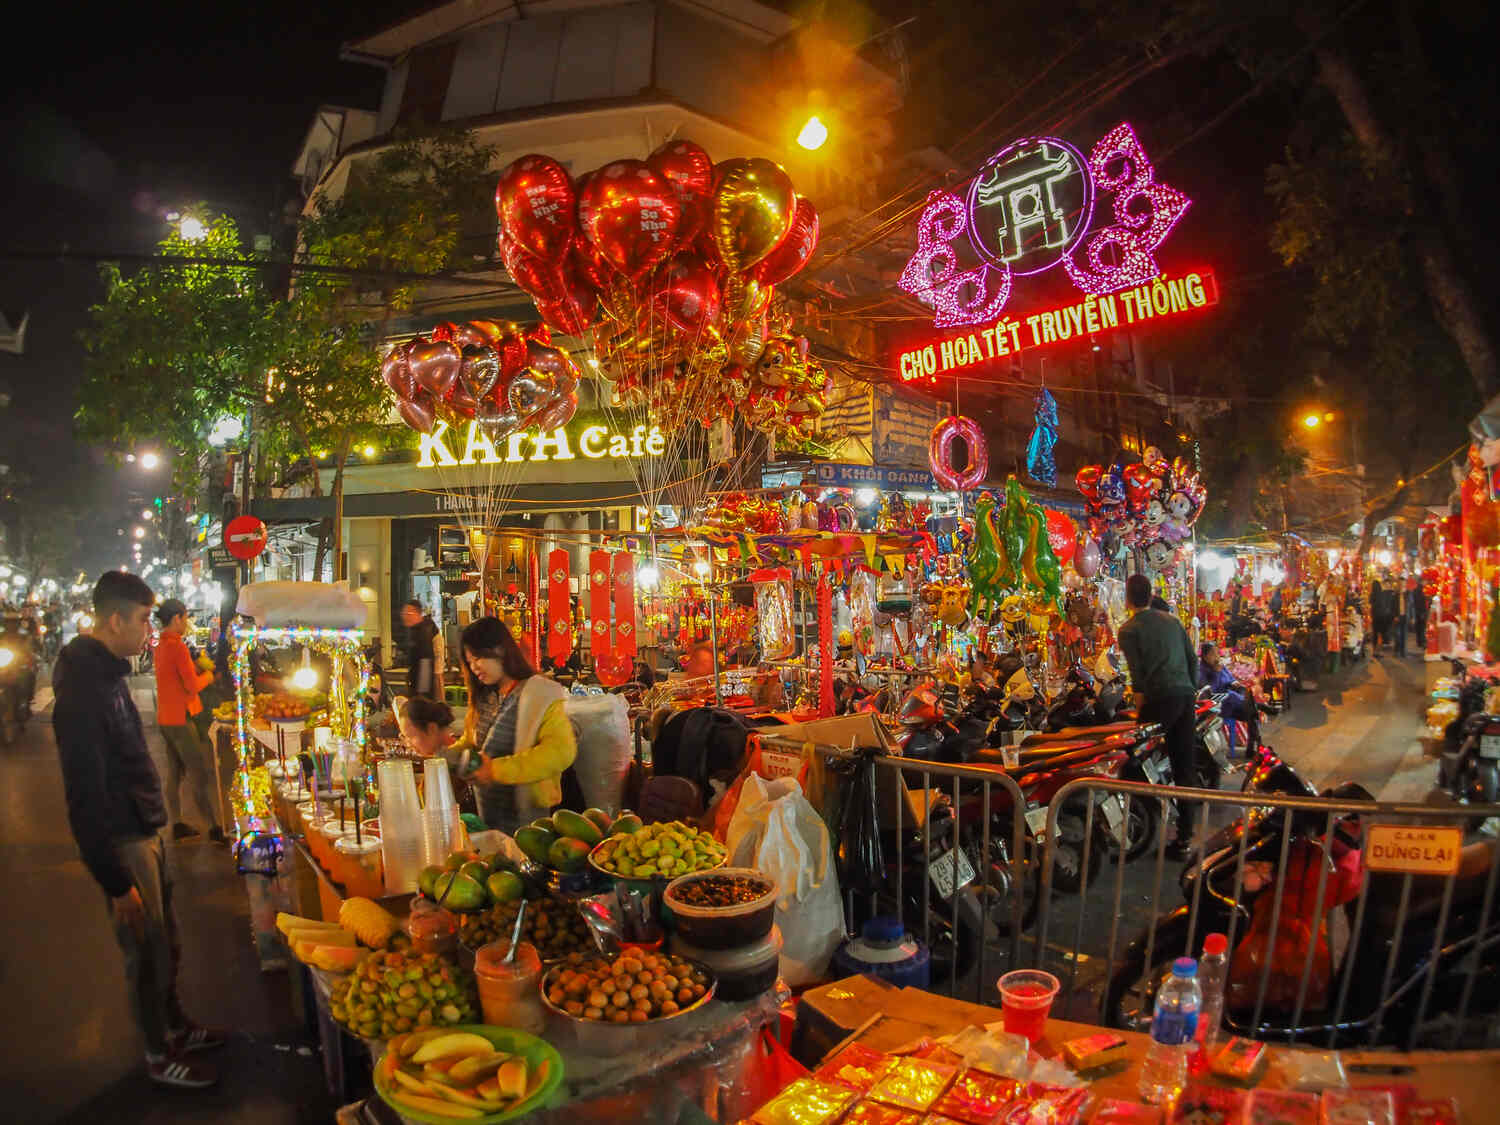 Lively street food market with colorful stalls and vibrant night atmosphere